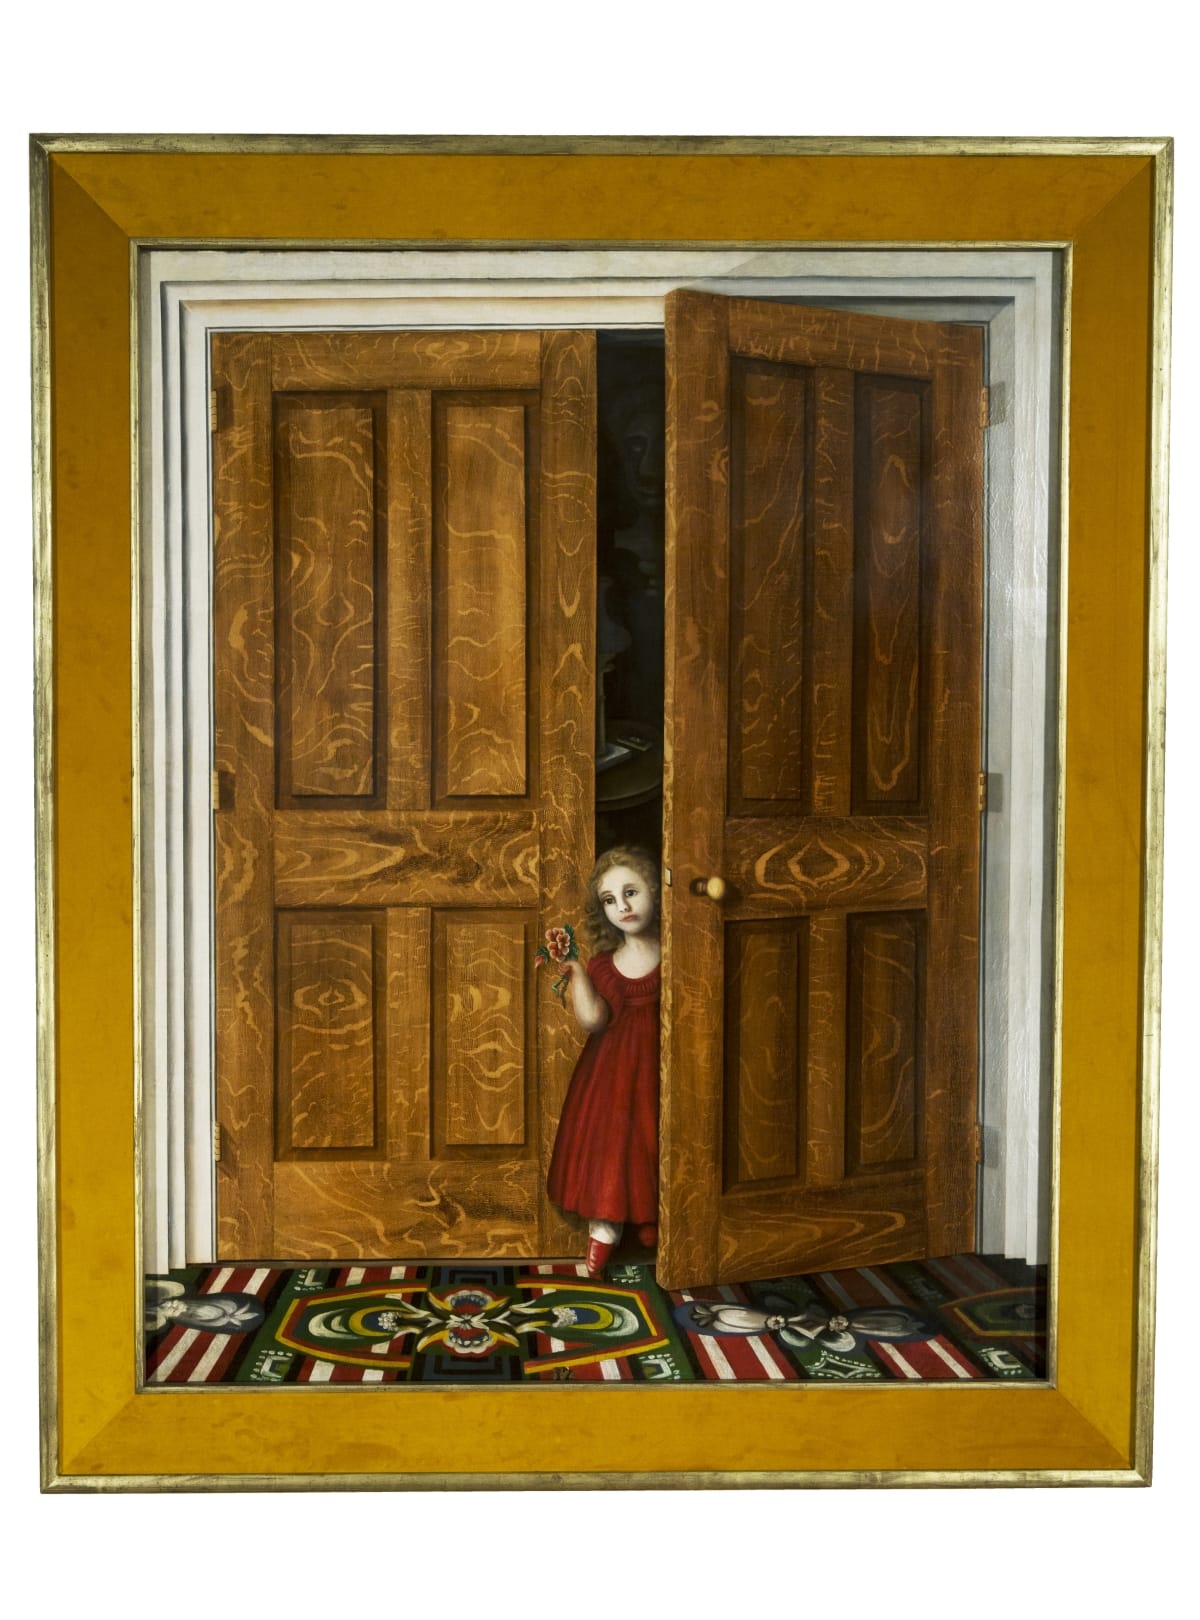 Opening the Door, considered painter George Washington Mark's masterpiece, is one of the highlights of The Henry Ford’s folk art collection.